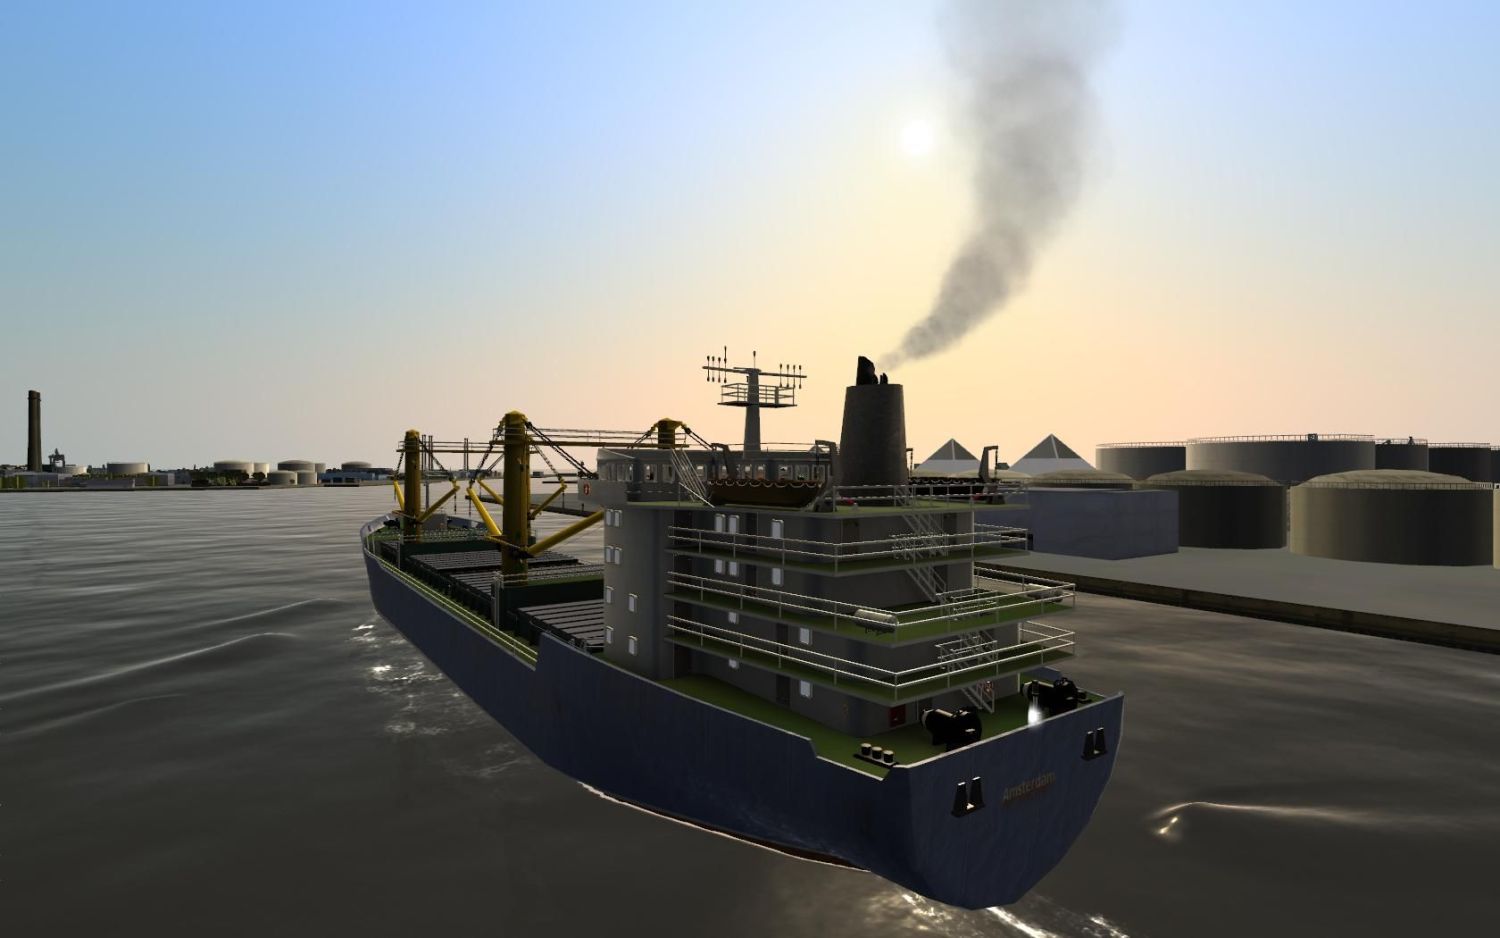 free ship simulator game by planetinaction.com